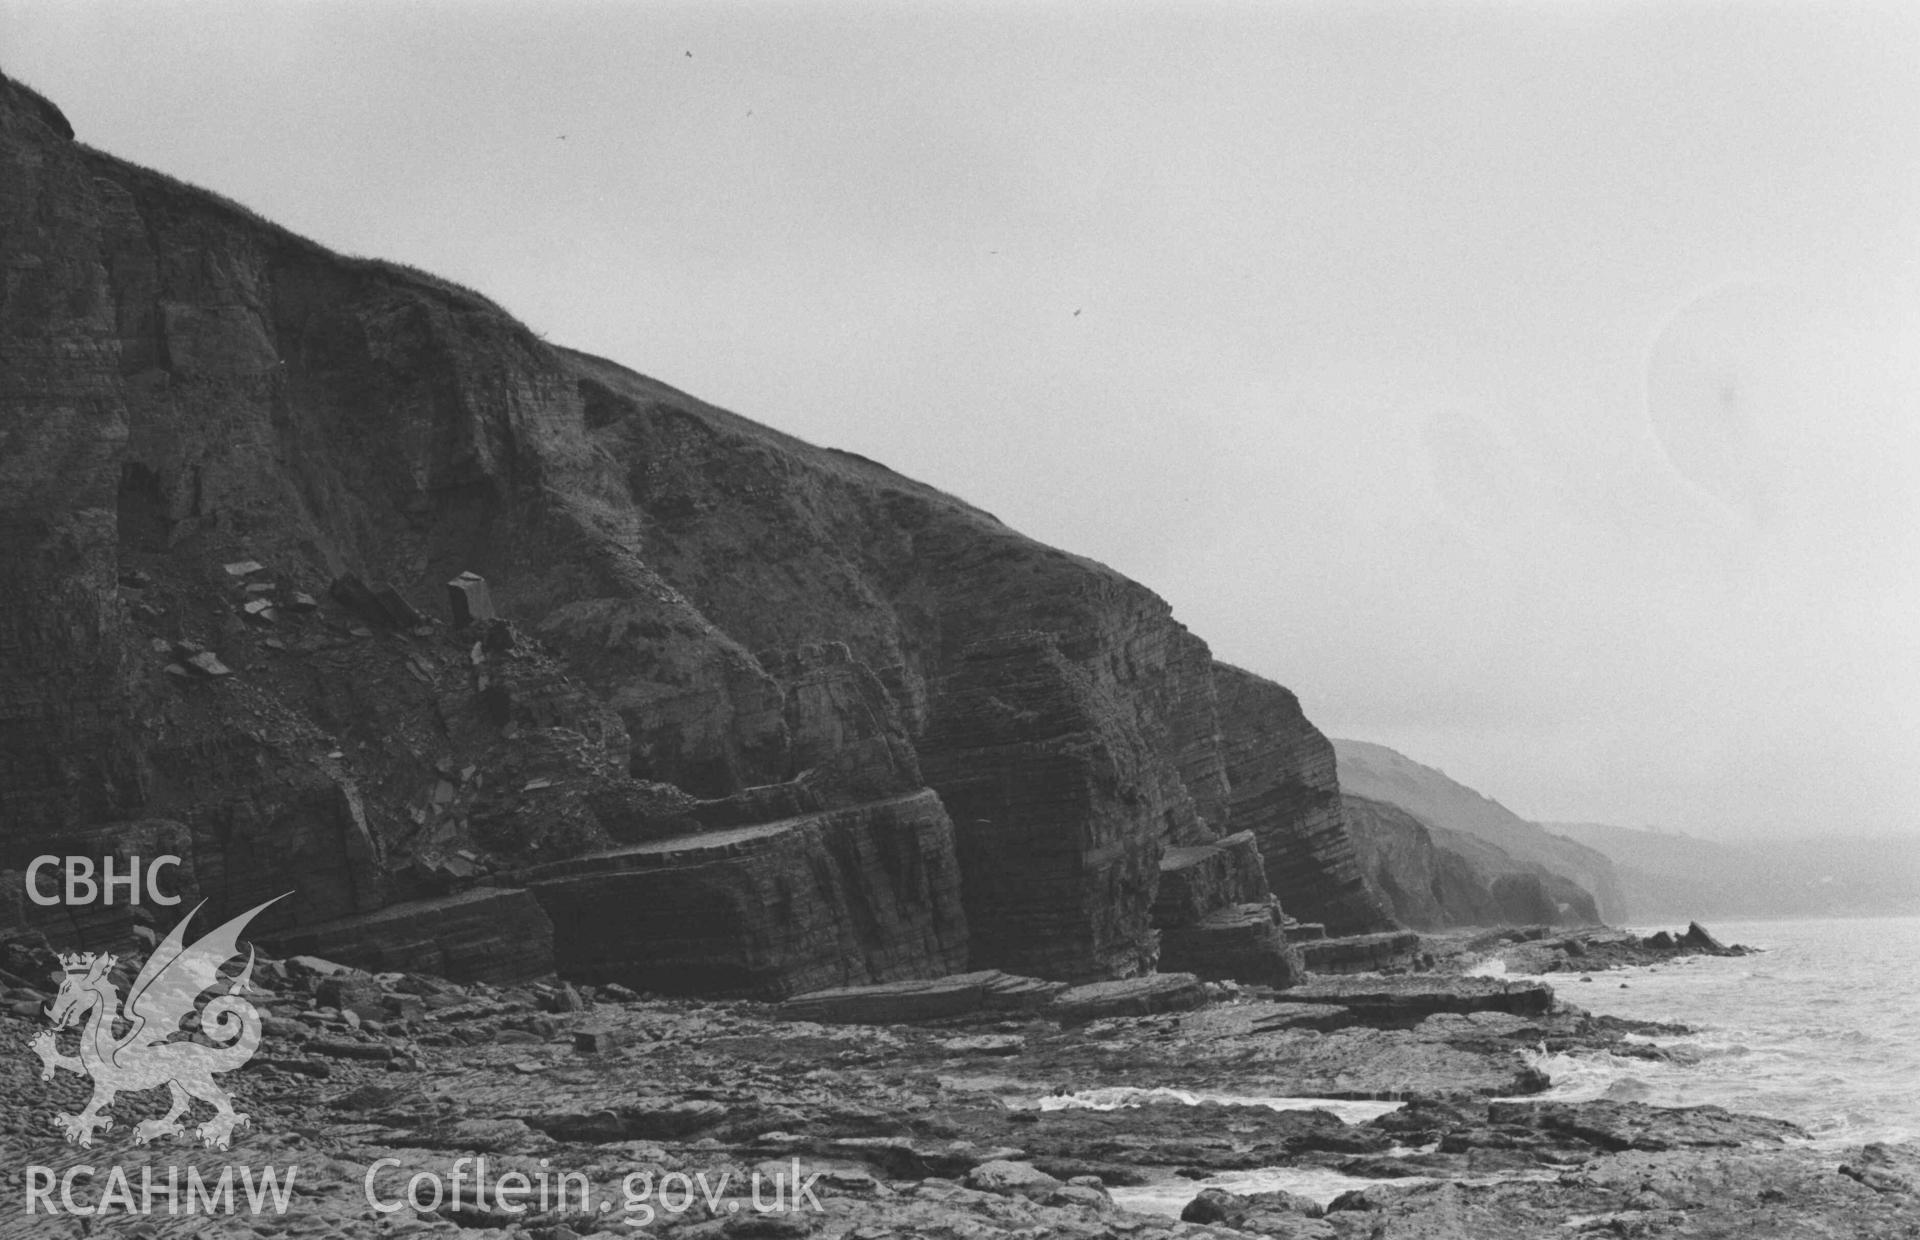 Digital copy of a black and white negative showing view down the coastfrom 300m west of the mouth of the Afon Gwinten, at low tide. Photographed by Arthur Chater on 3 January 1969. Looking south west from Grid Reference SN 4325 6132.